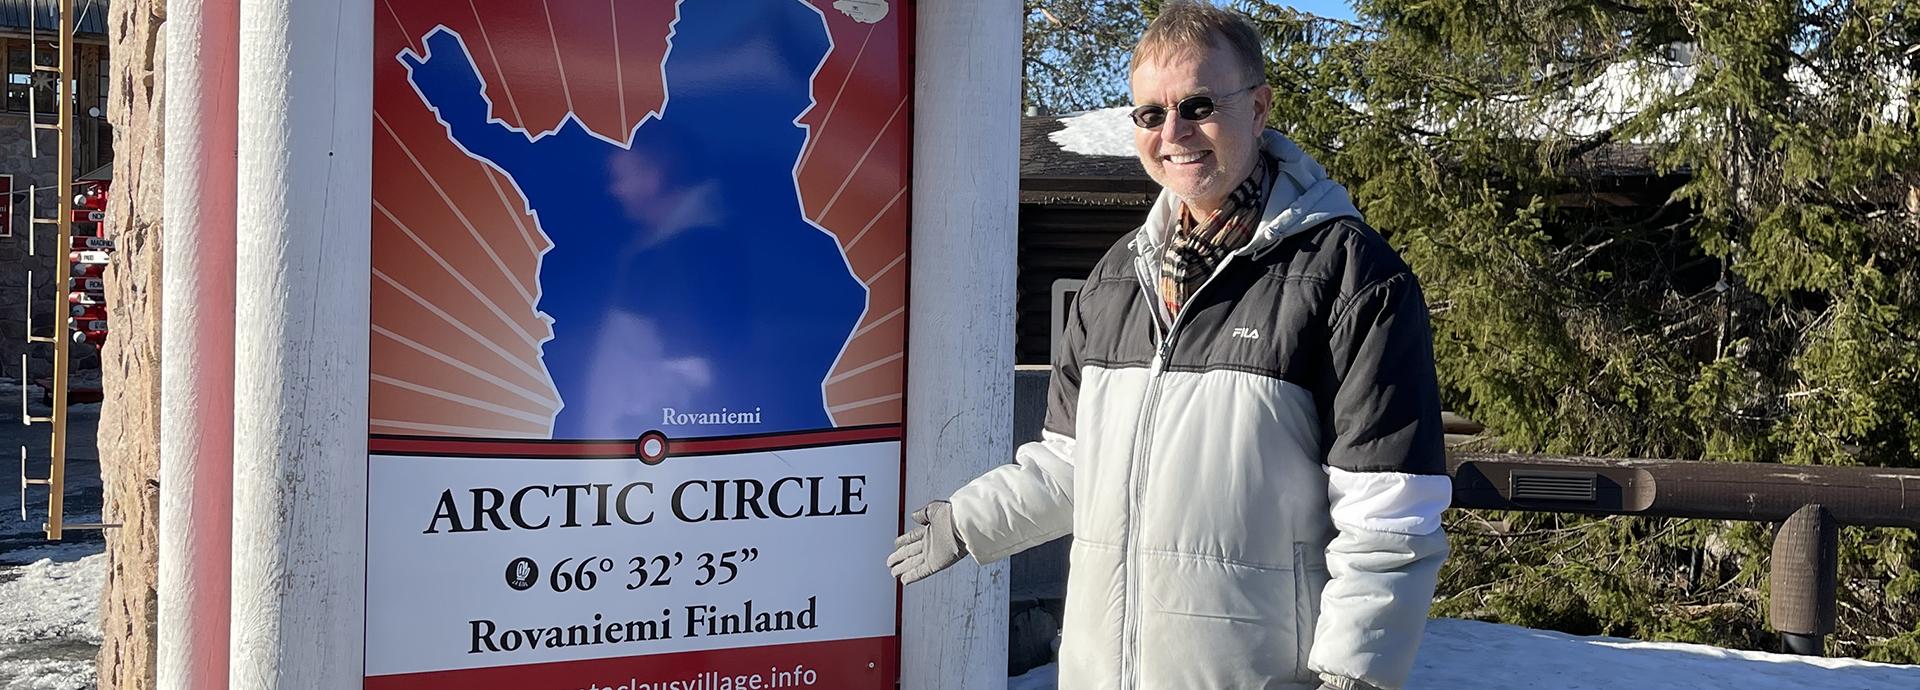 Fulbright Specialist John Donnellan next to the Artic Circle sign in Rovaniemi on a sunny winter day.